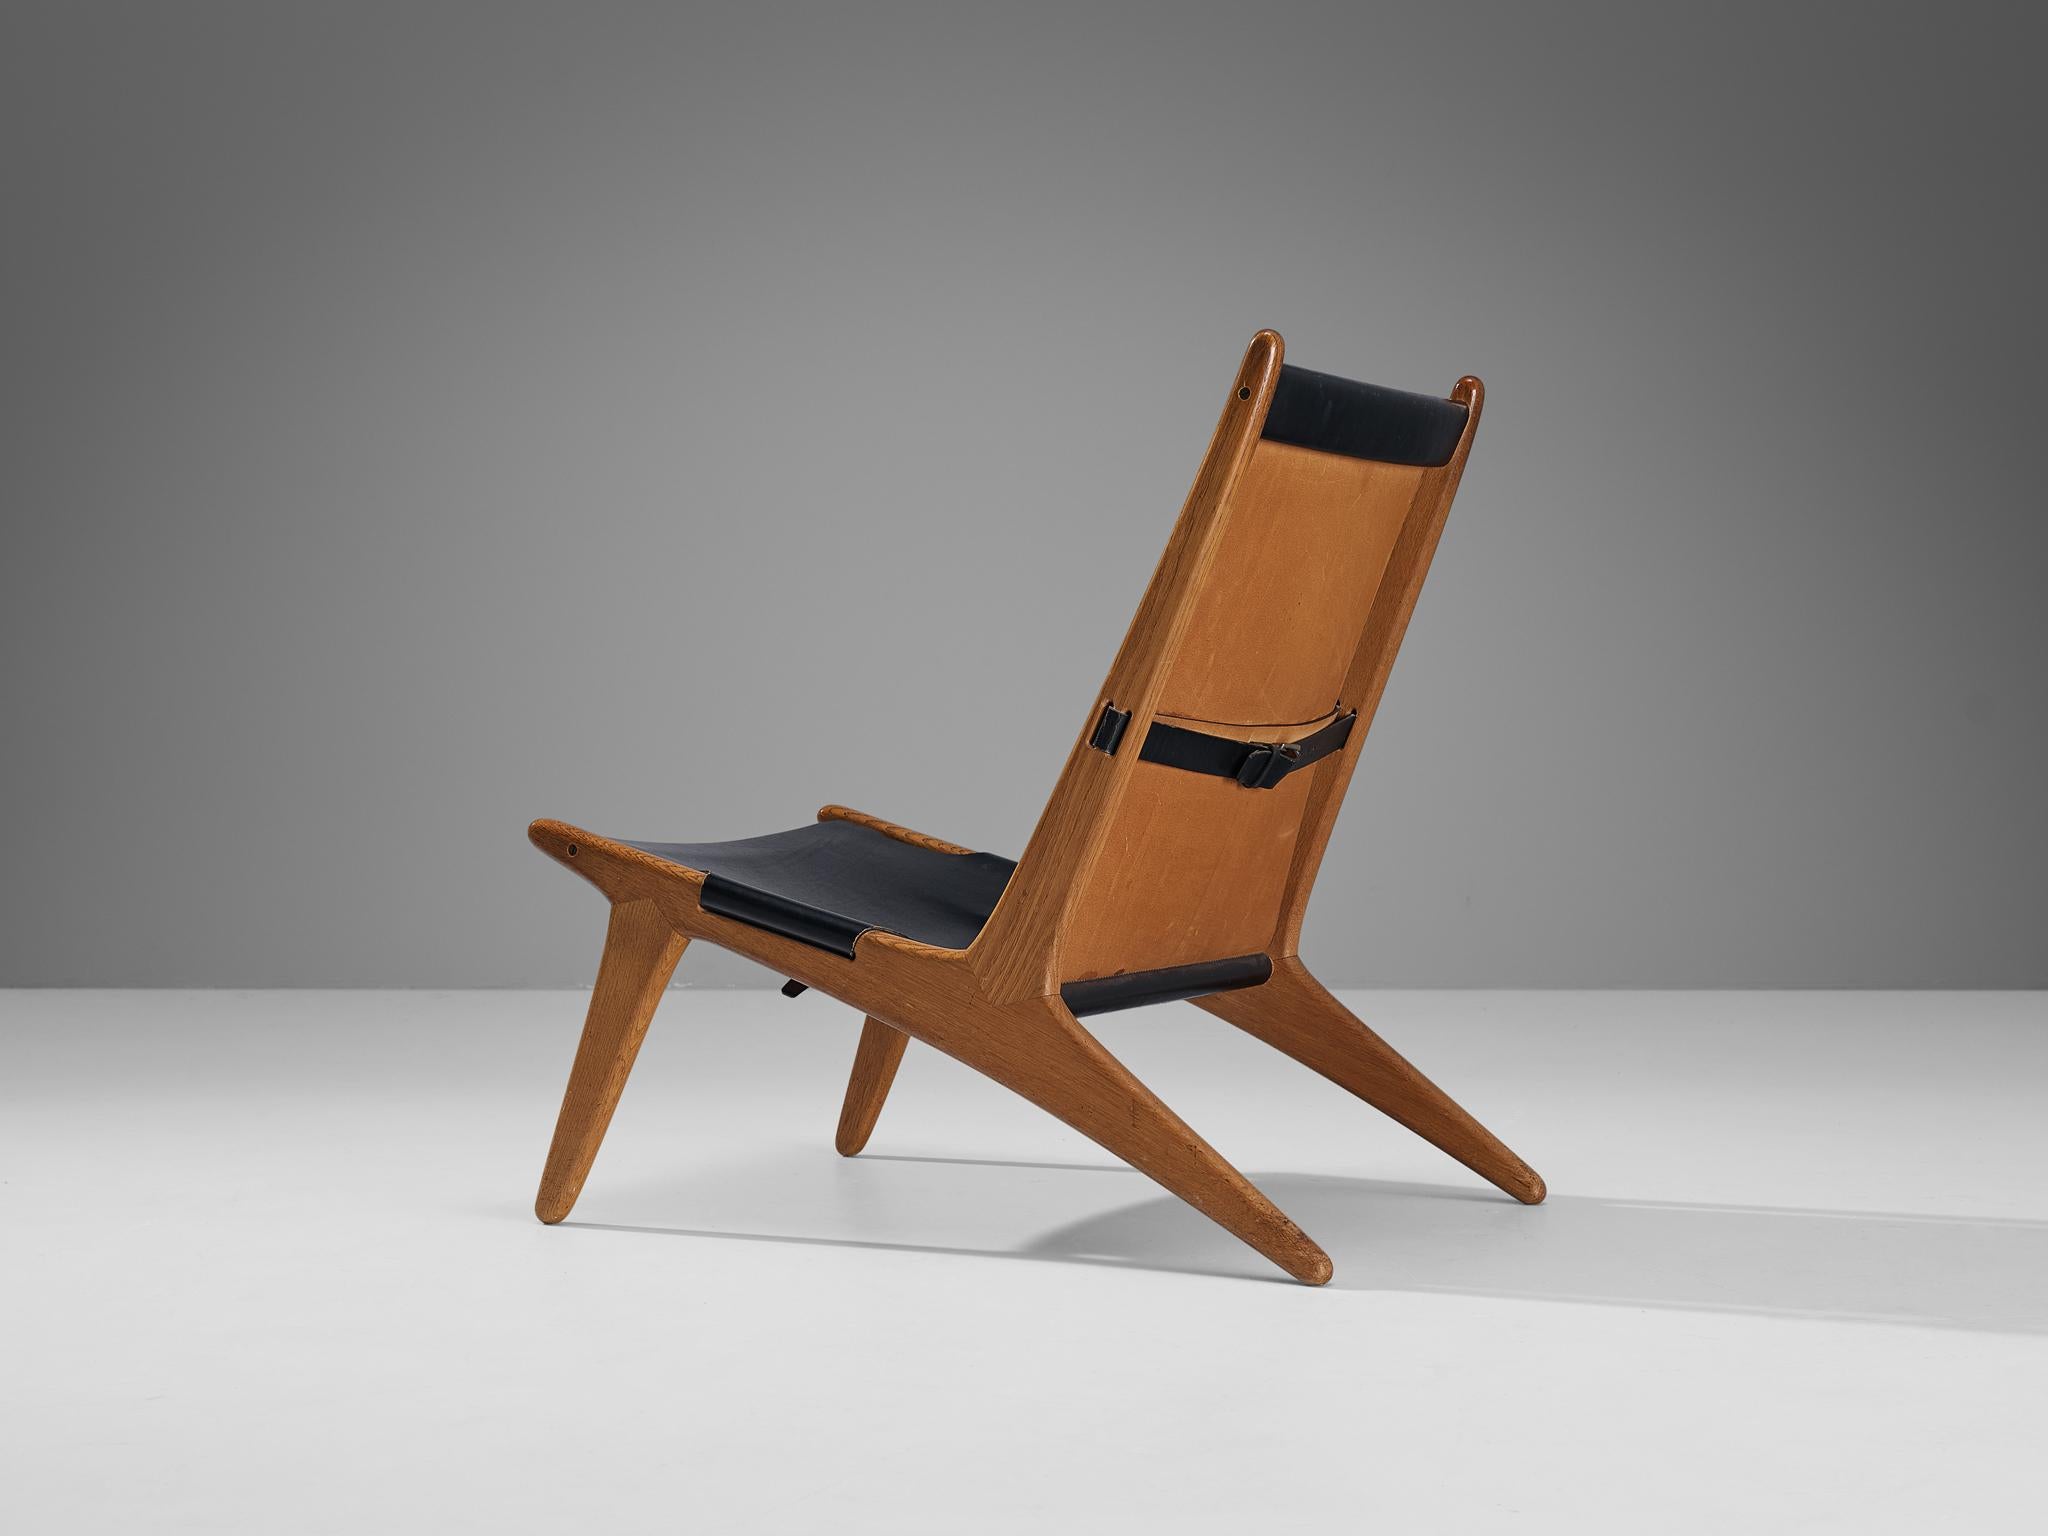 Uno & Östen Kristiansson for Luxus, hunting chair, model '204', leather, oak, Sweden, 1954

Swedish hunting chair designed by Uno & Östen Kristiansson in the fifties. This unique design has a very strong appearance and easily catches the eye of the